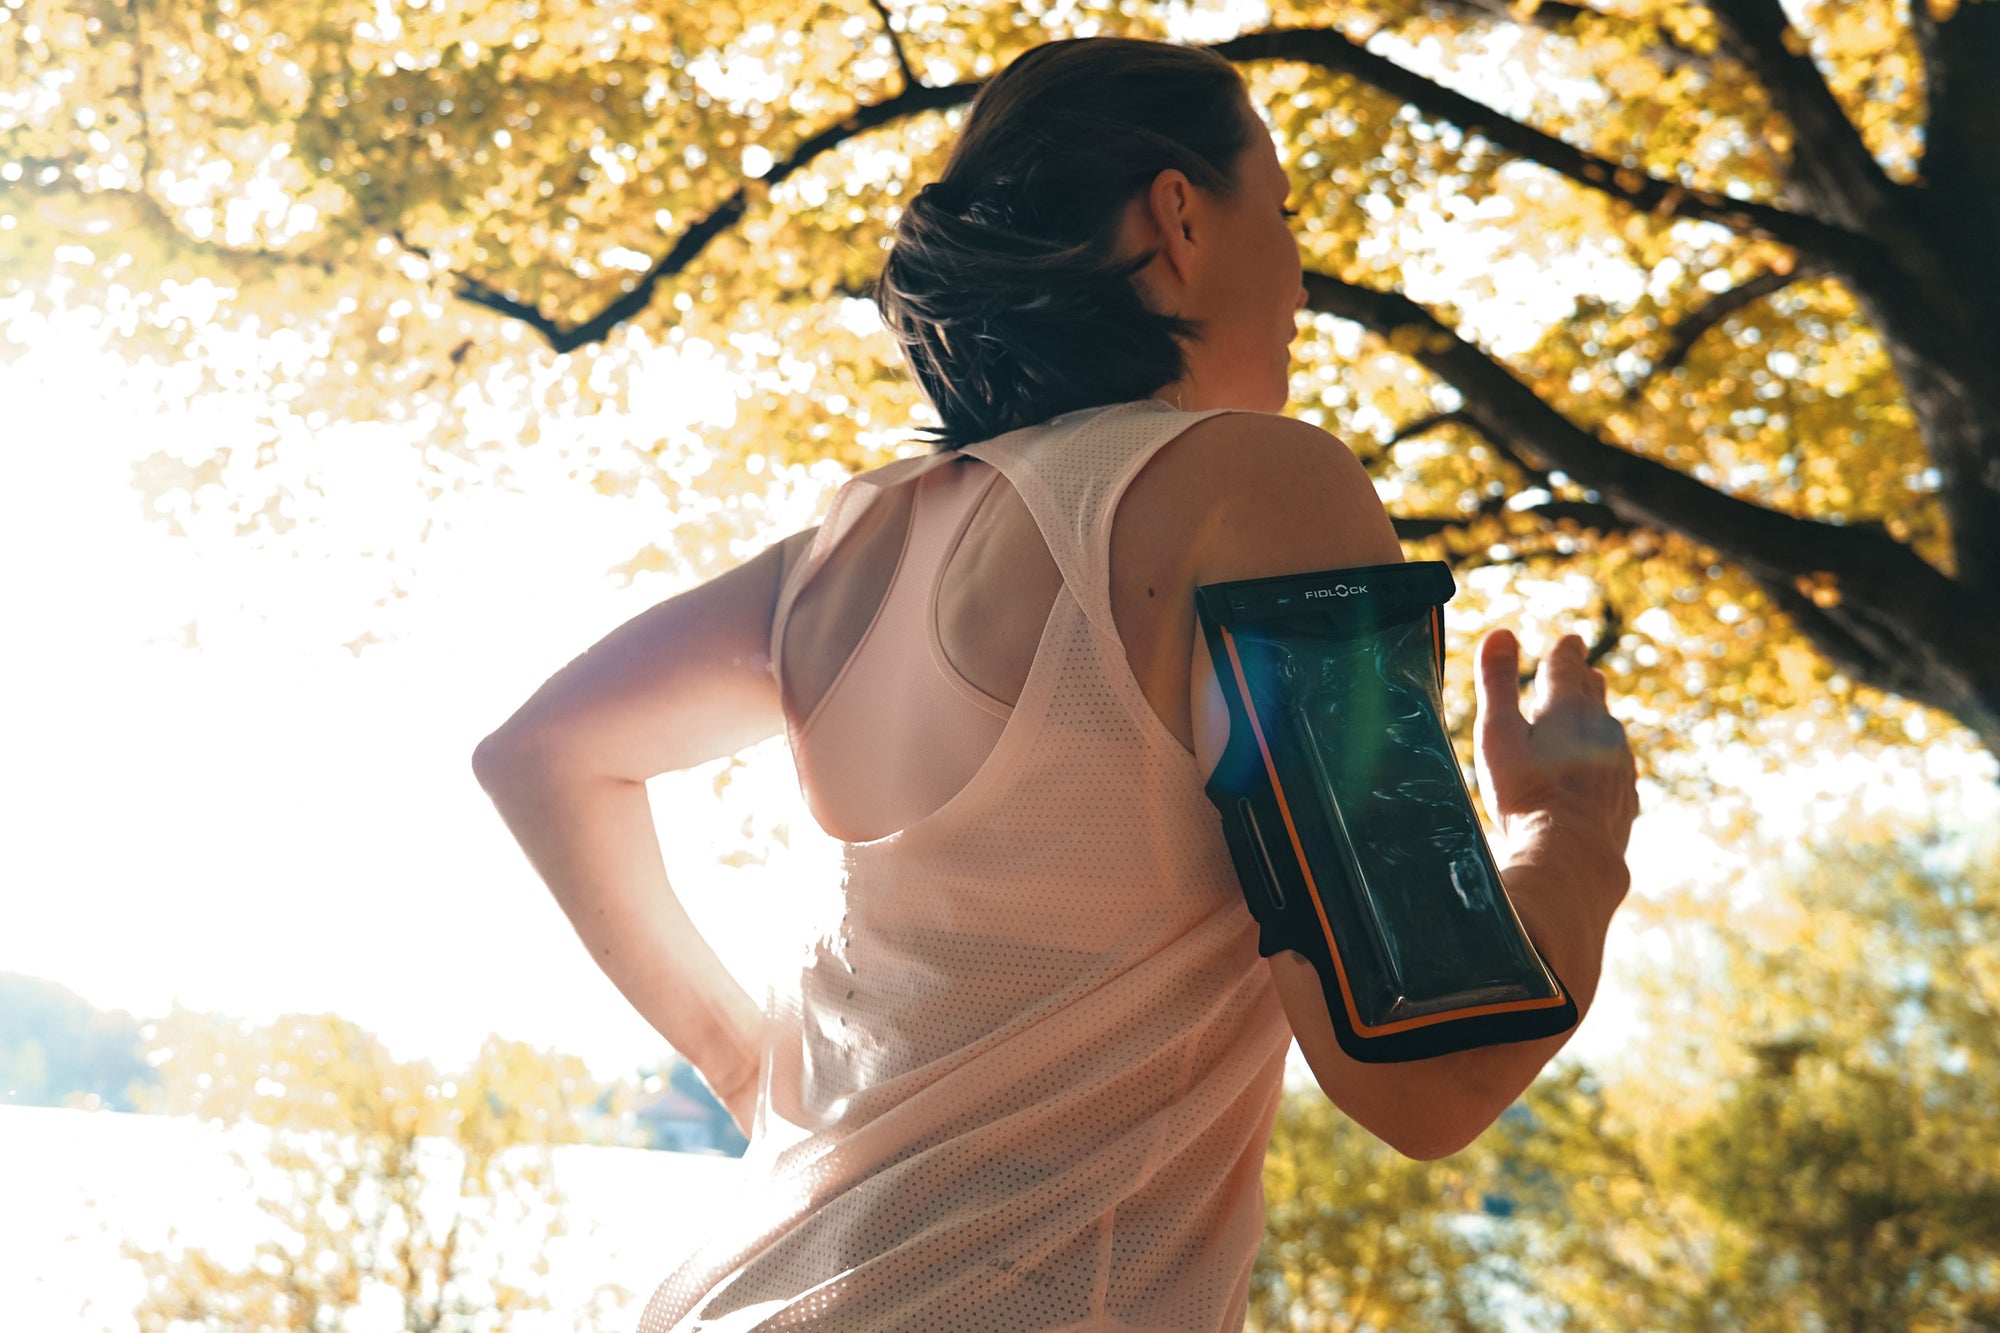 Woman wearing Fidlock Phone Arm Band while running